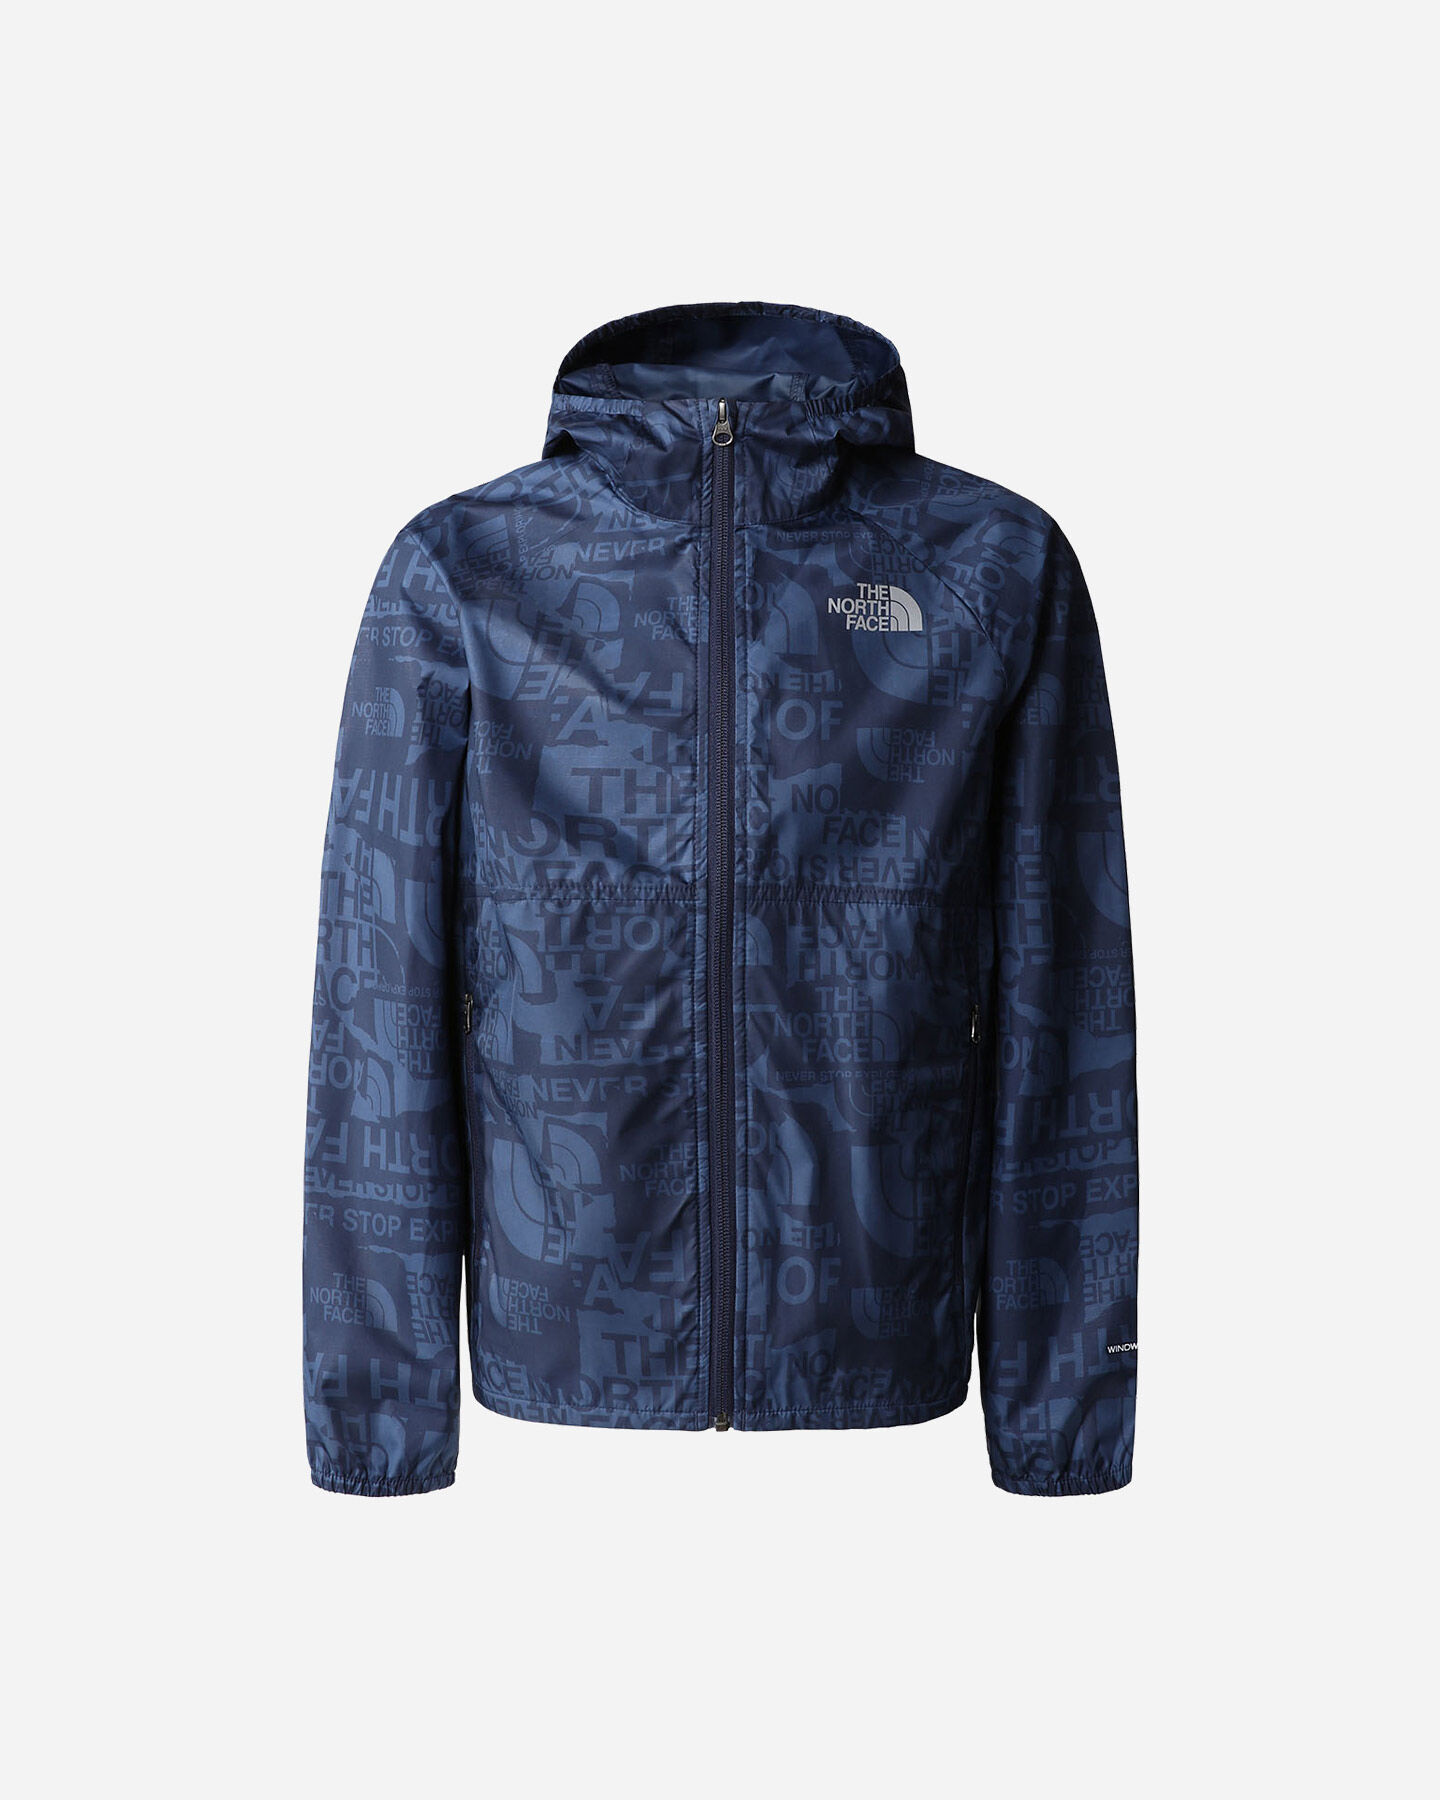  Giubbotto THE NORTH FACE NEVER STOP JR S5537293|IWU|S scatto 0